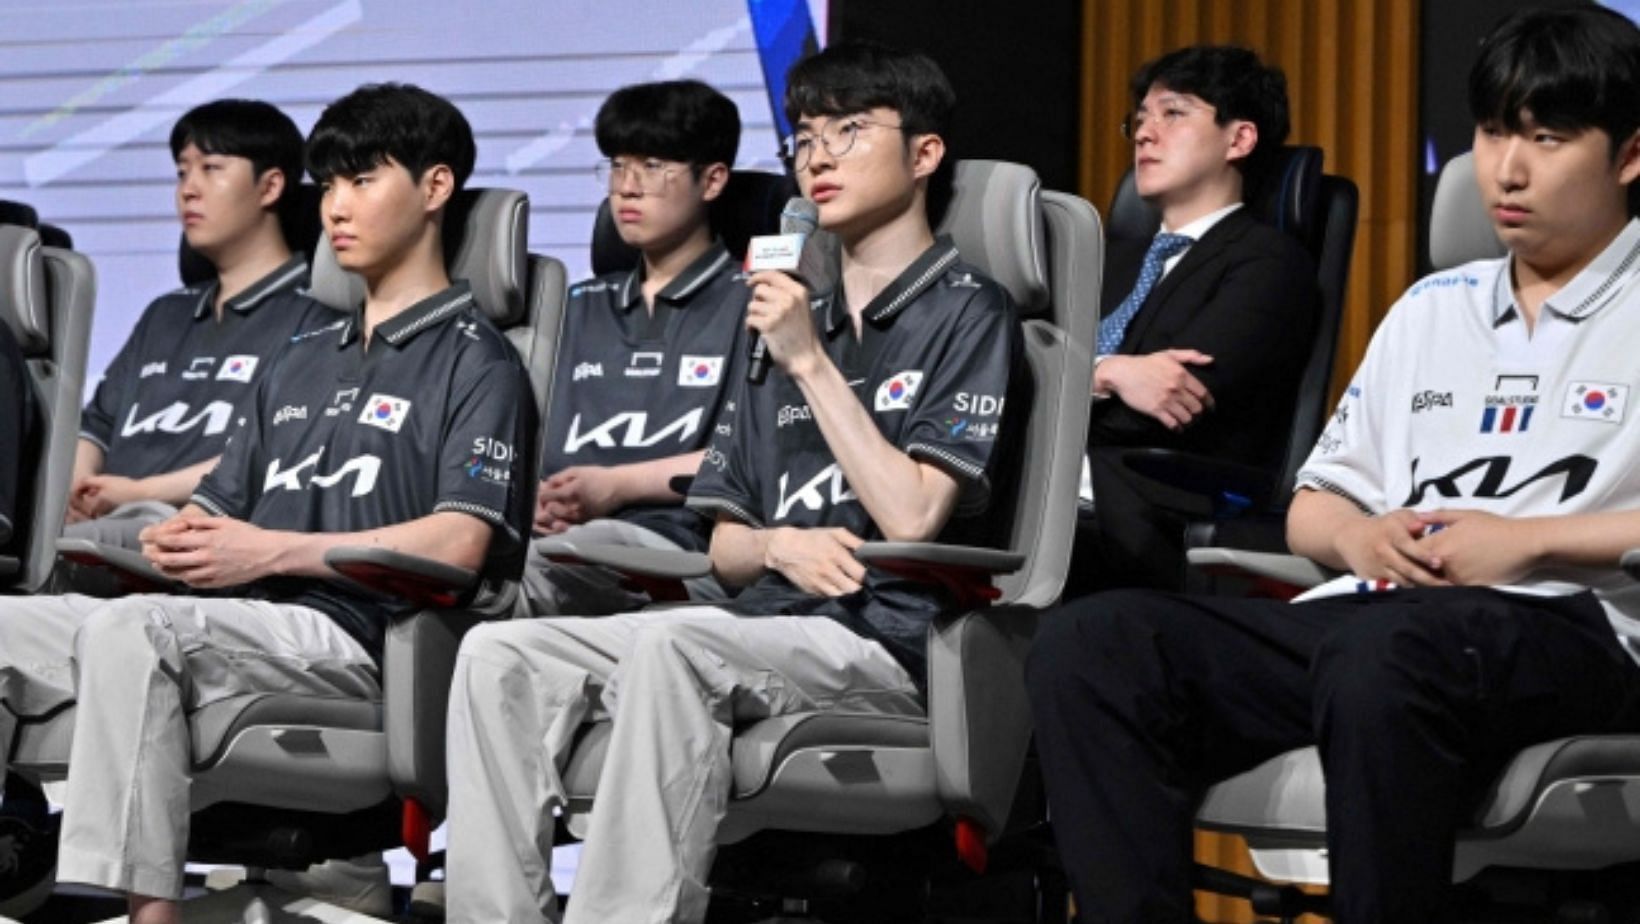 E-sports League of Legends team captain Lee Sang-hyeok and his team. (Image via AFP)